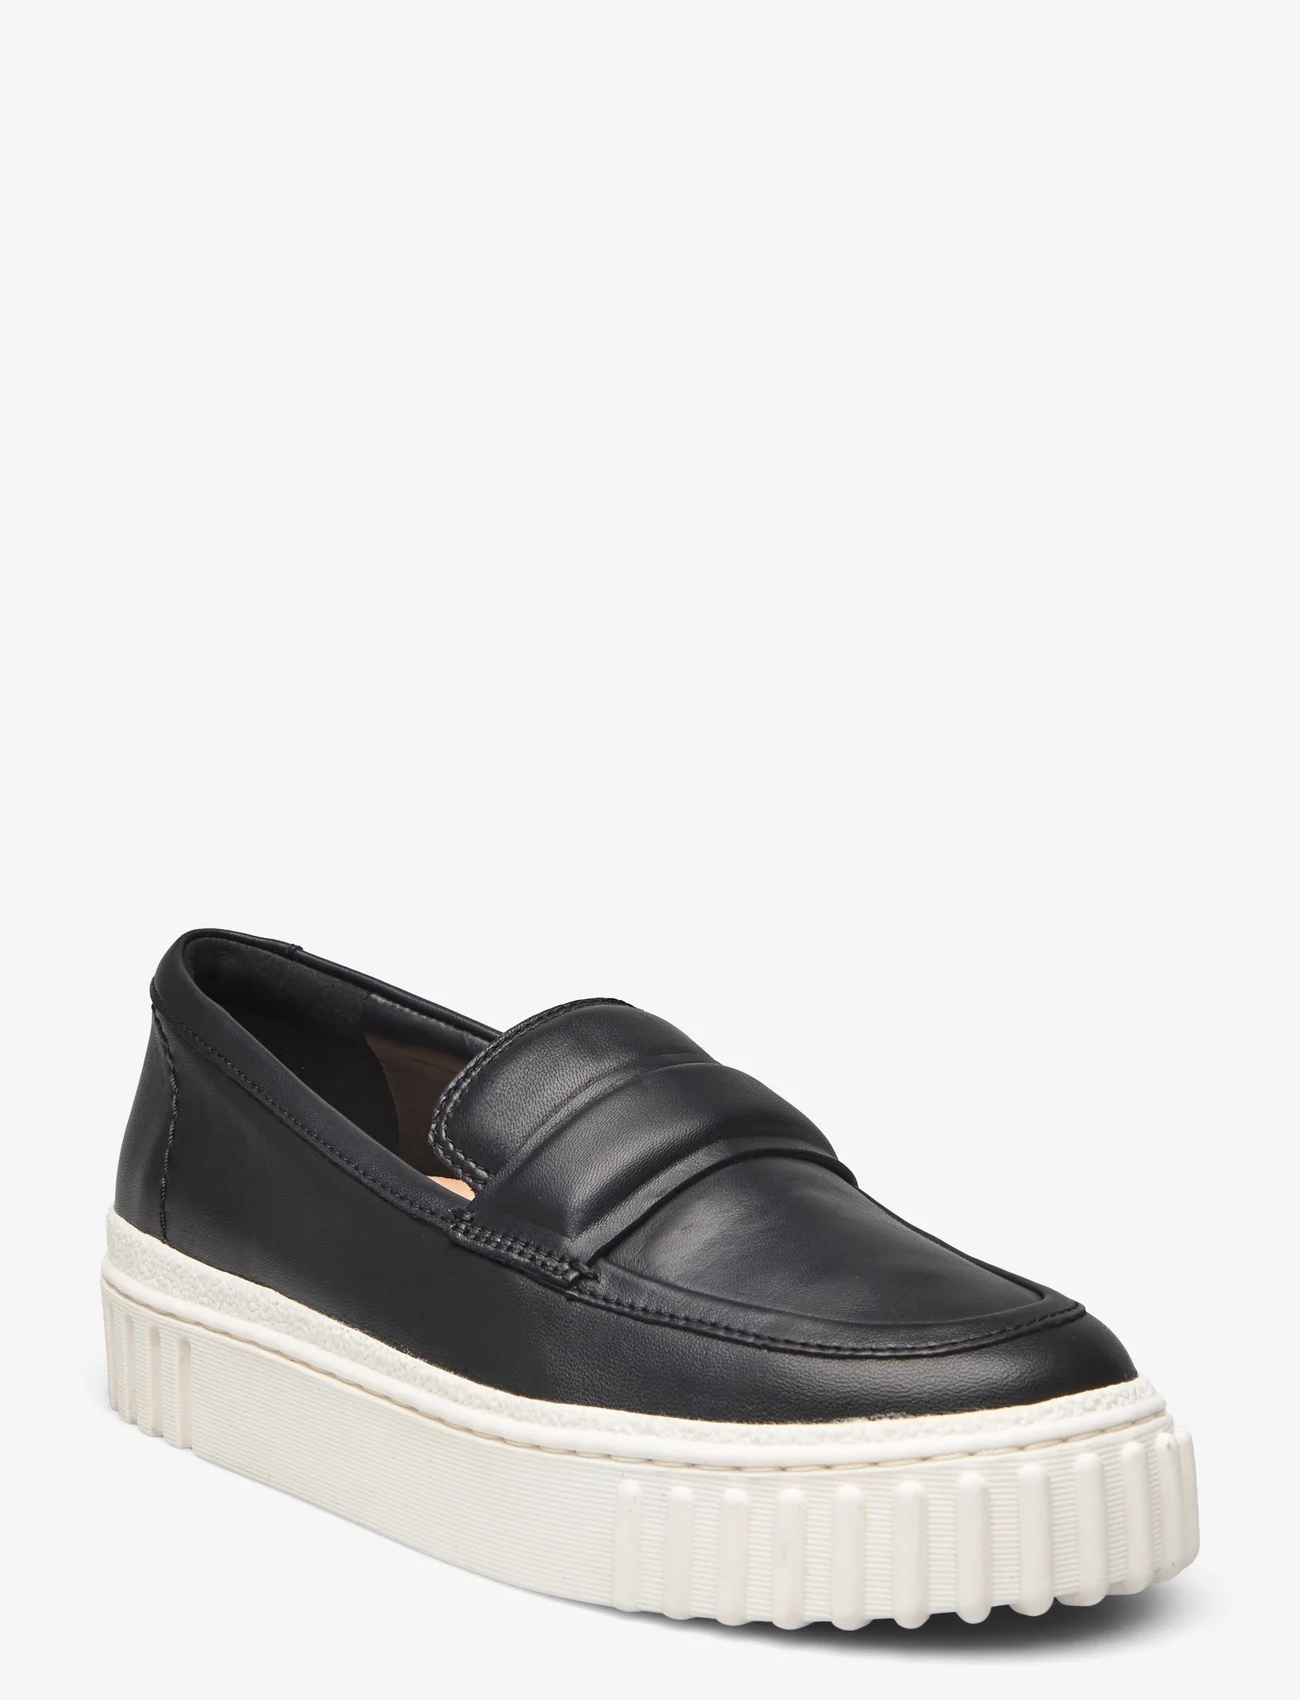 Clarks - Mayhill Cove D - gimtadienio dovanos - 1216 black leather - 0